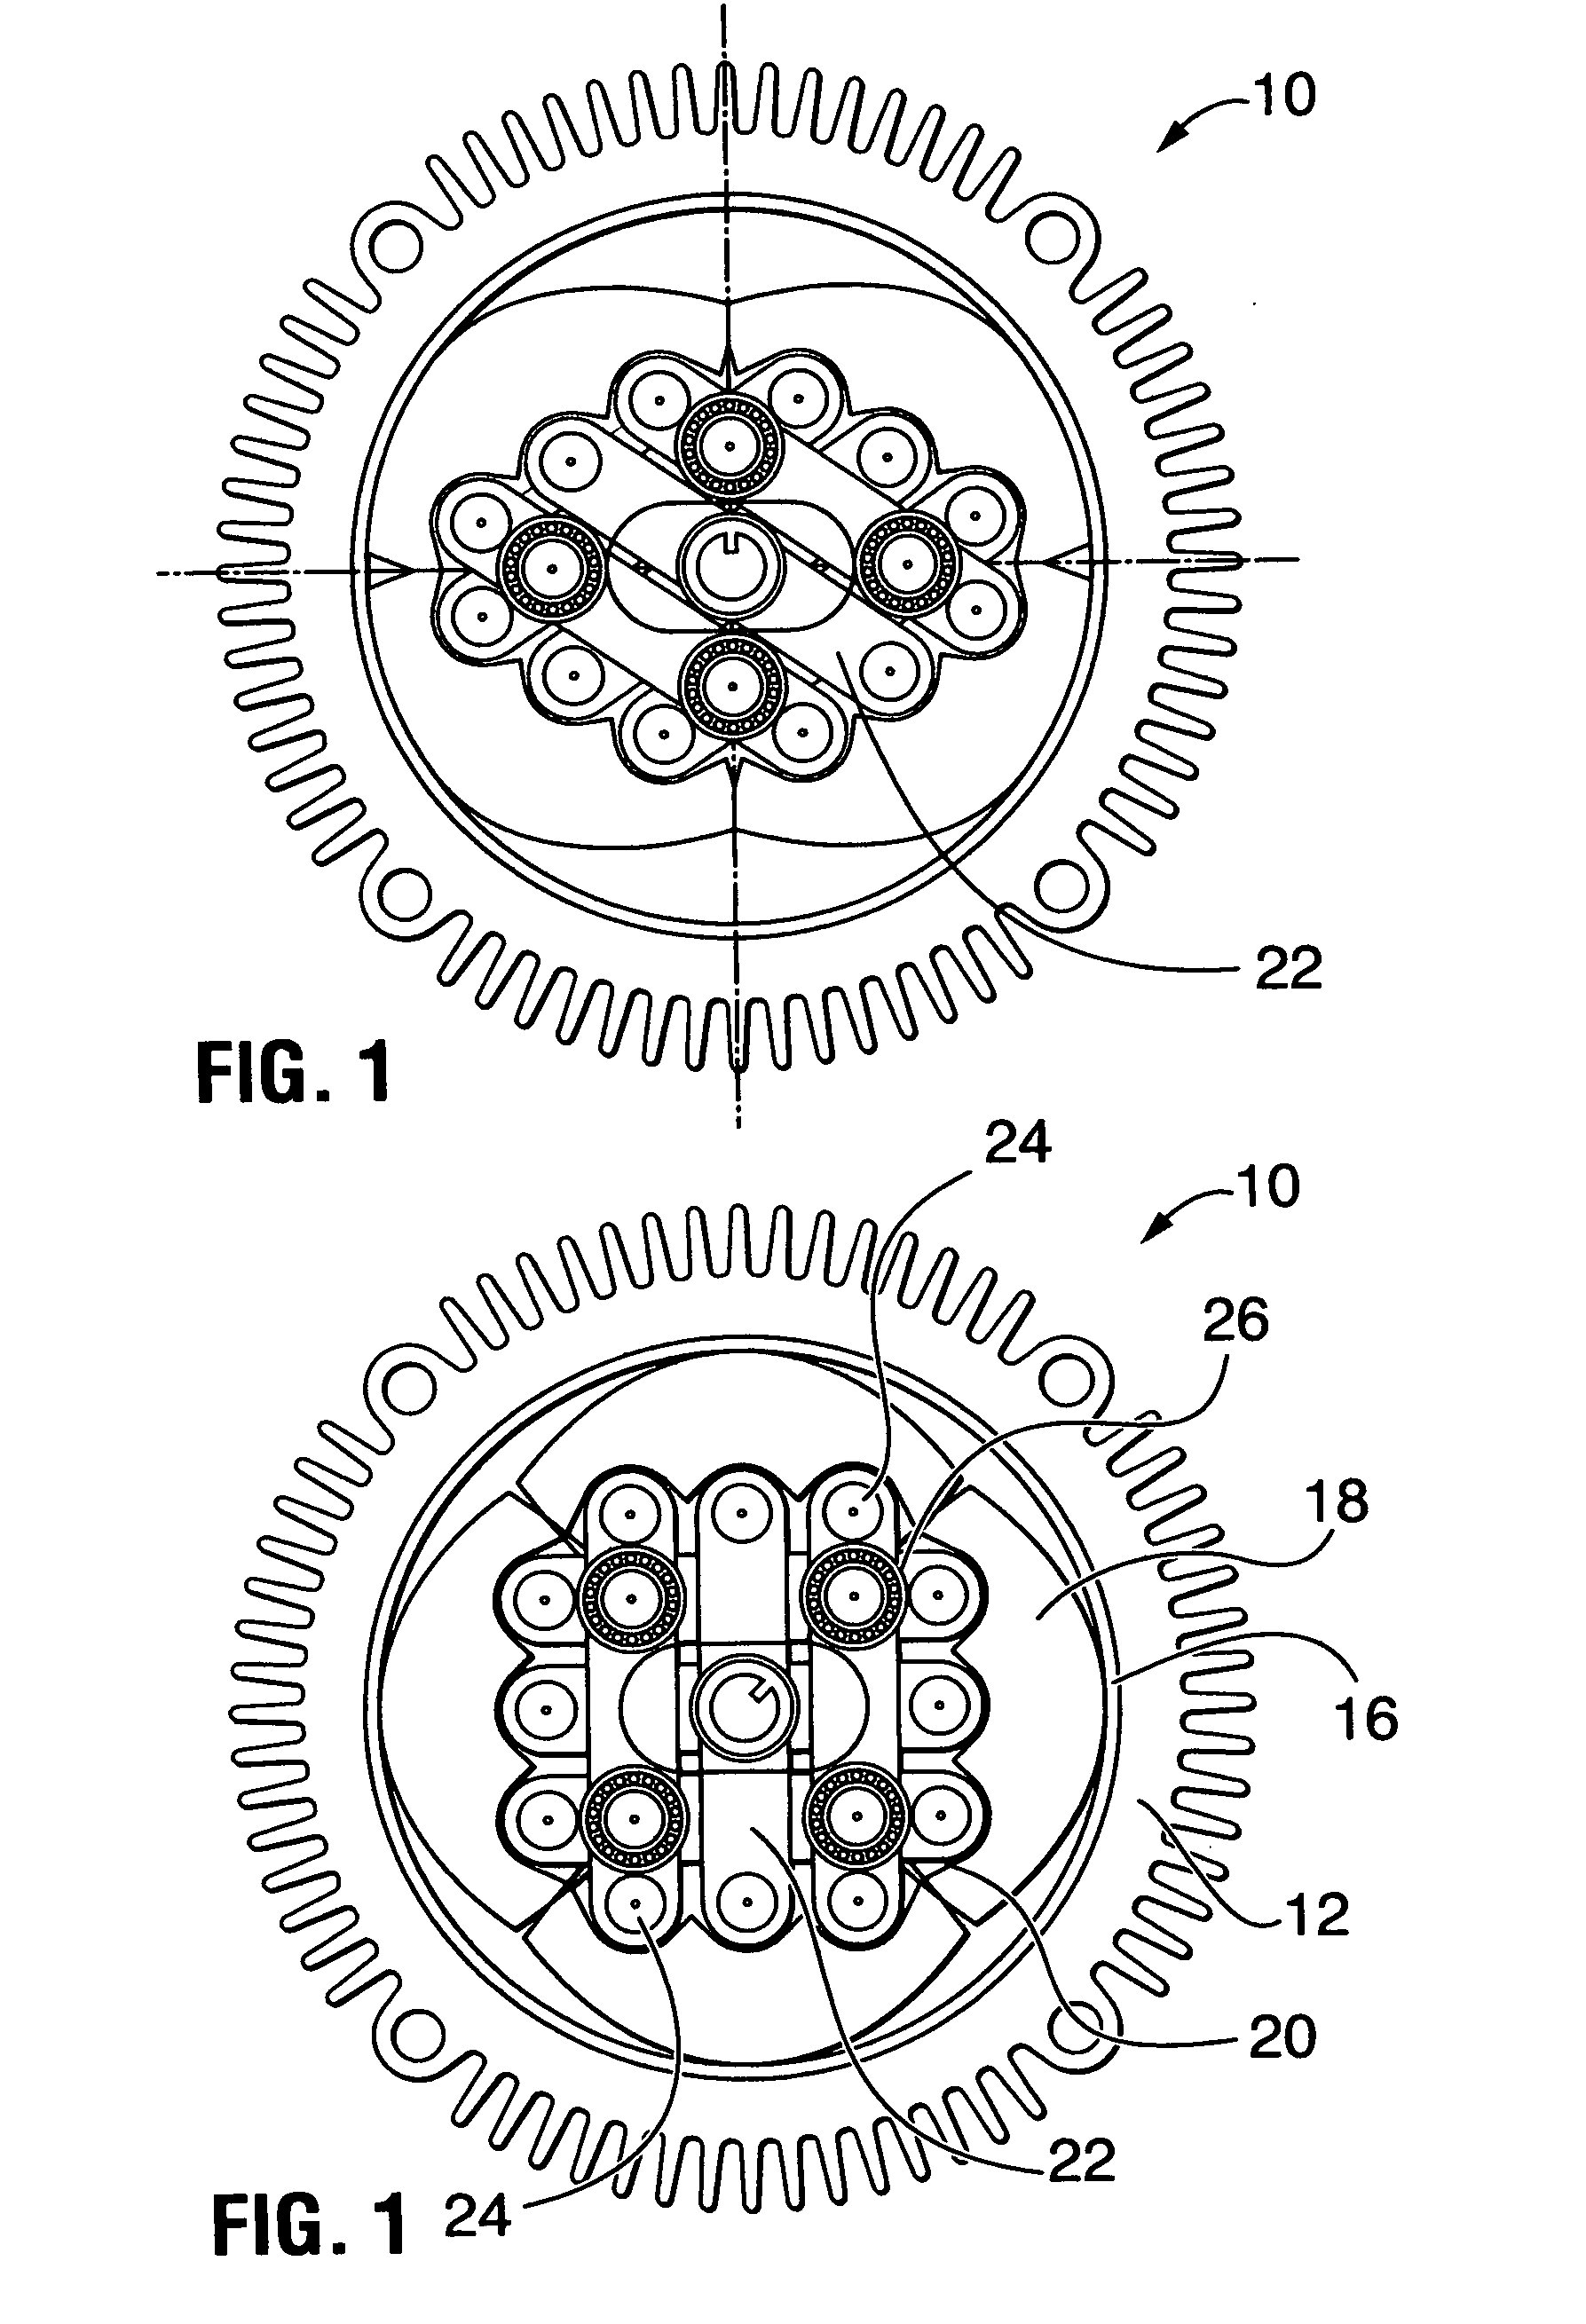 Ballanced rotary internal combustion engine or cycling volume machine